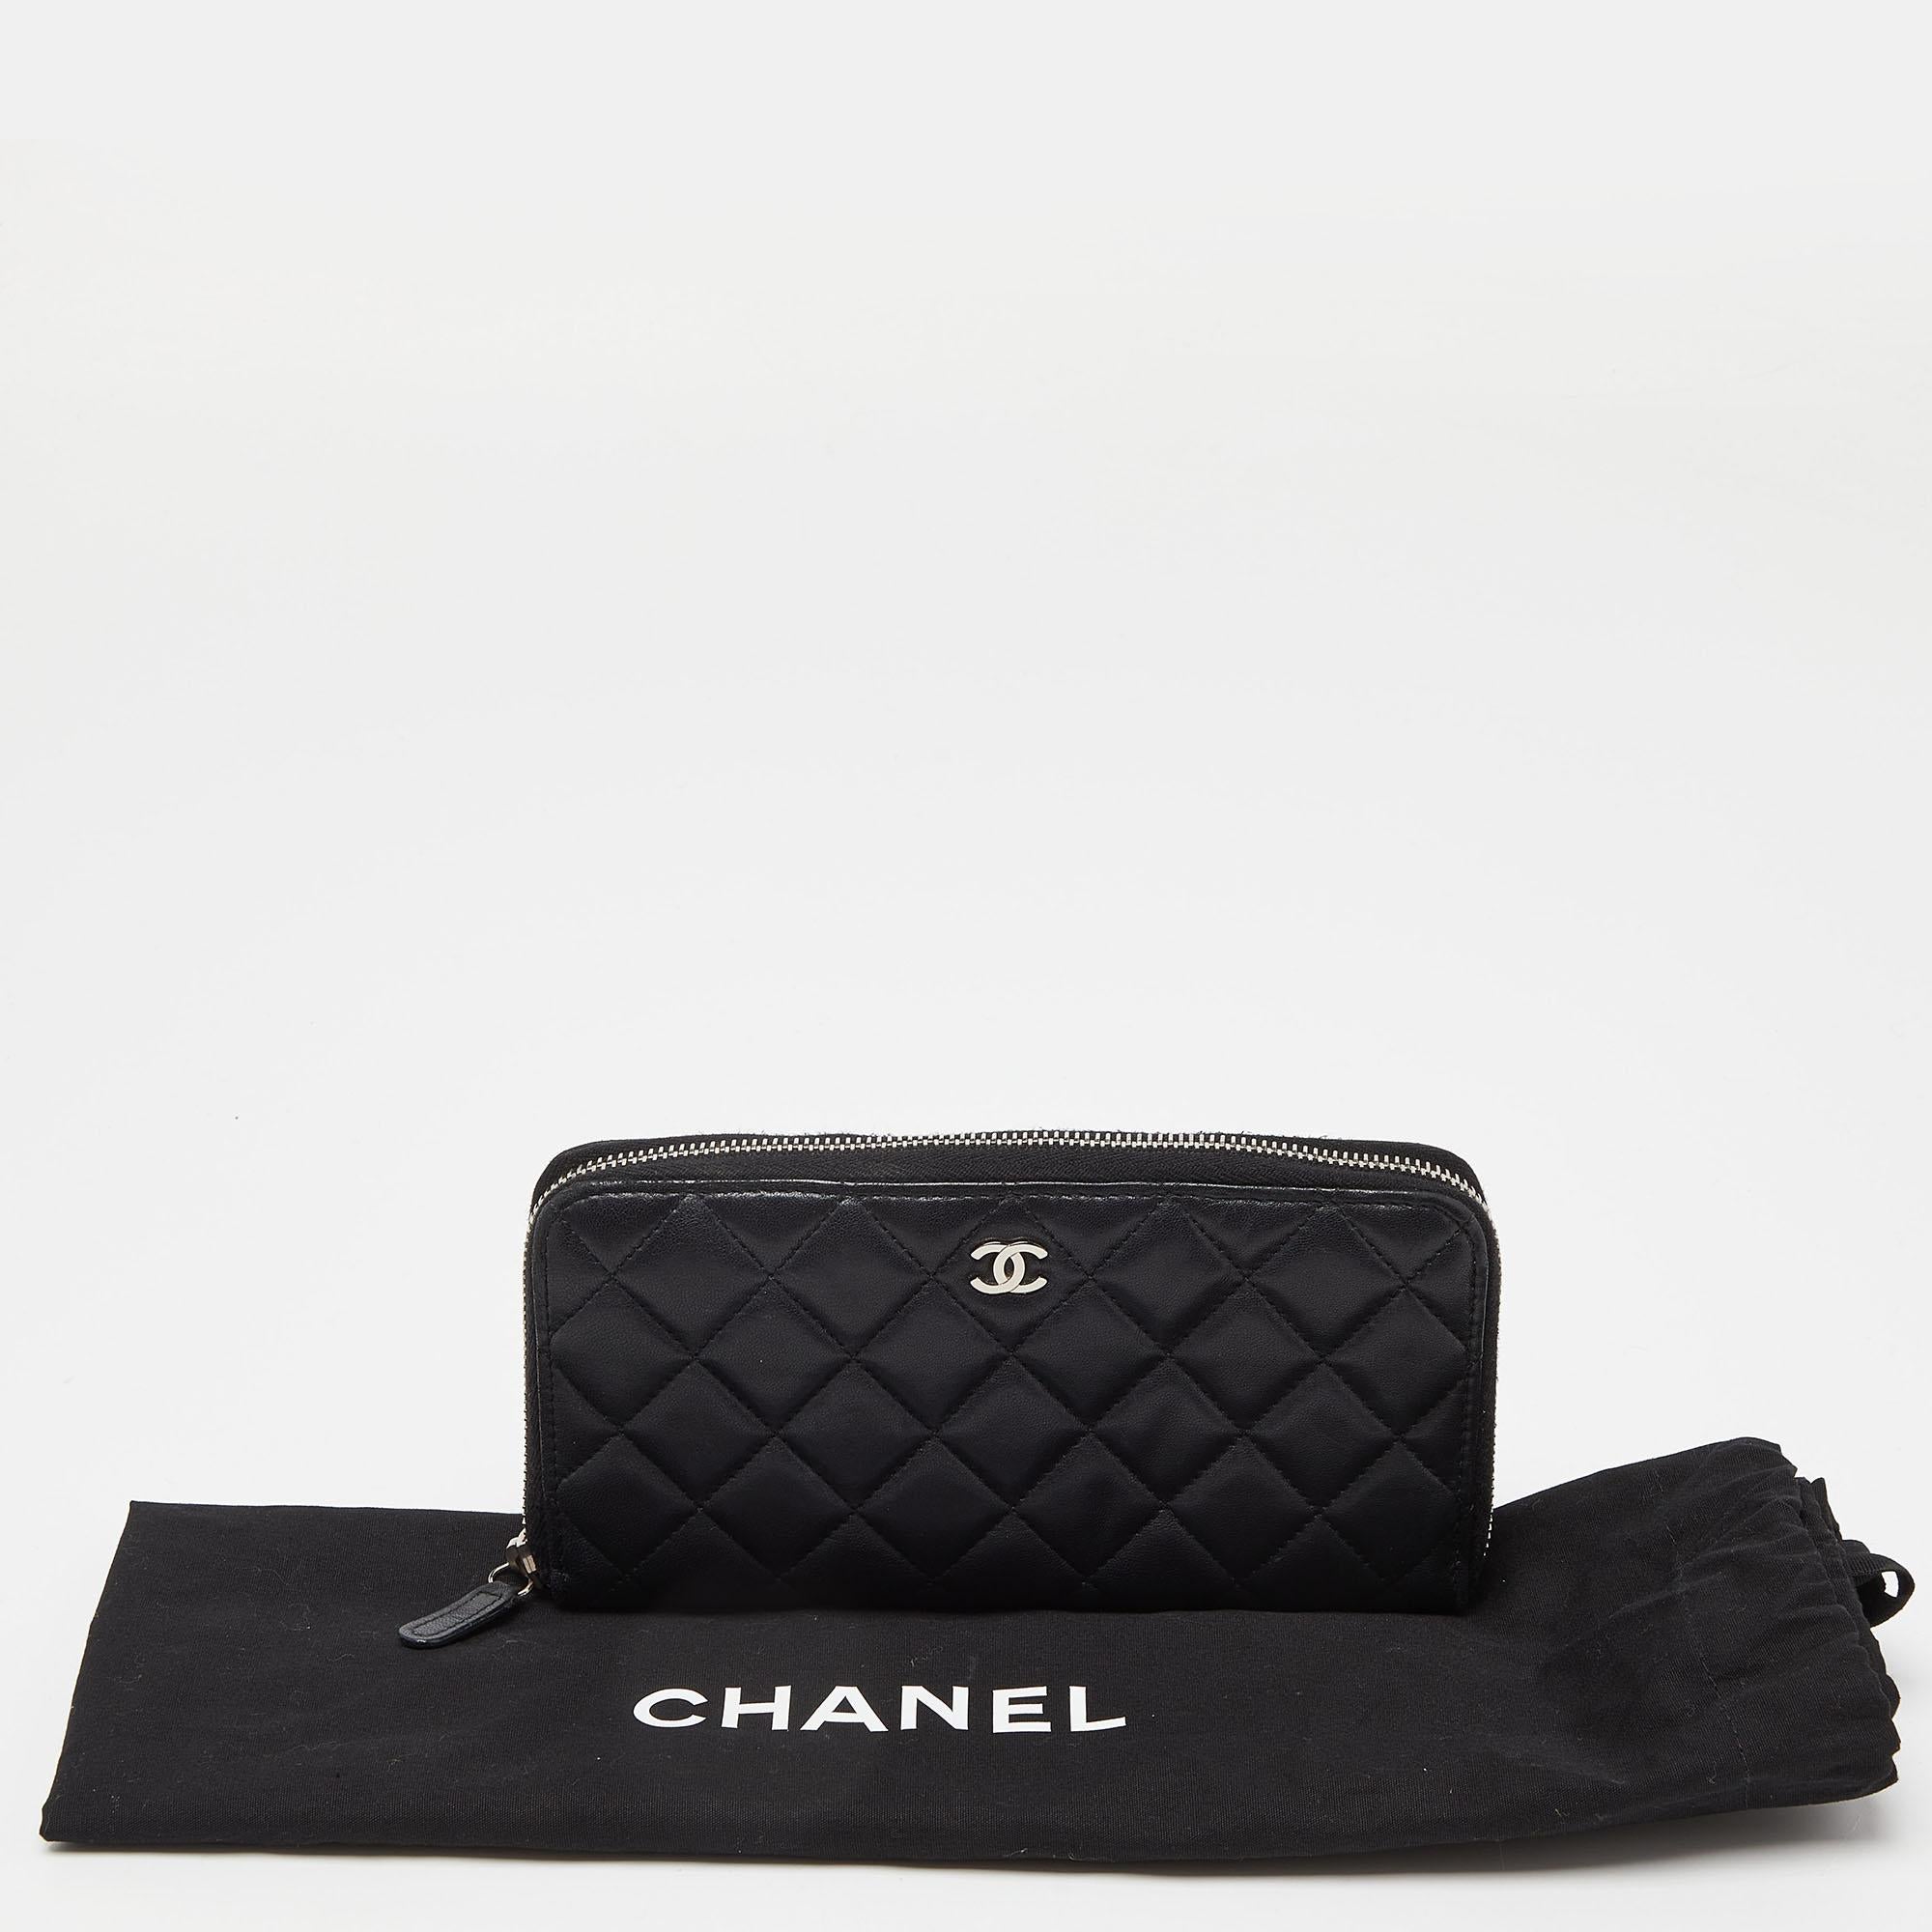 Chanel Black Quilted Leather CC Zip Around Wallet For Sale 6